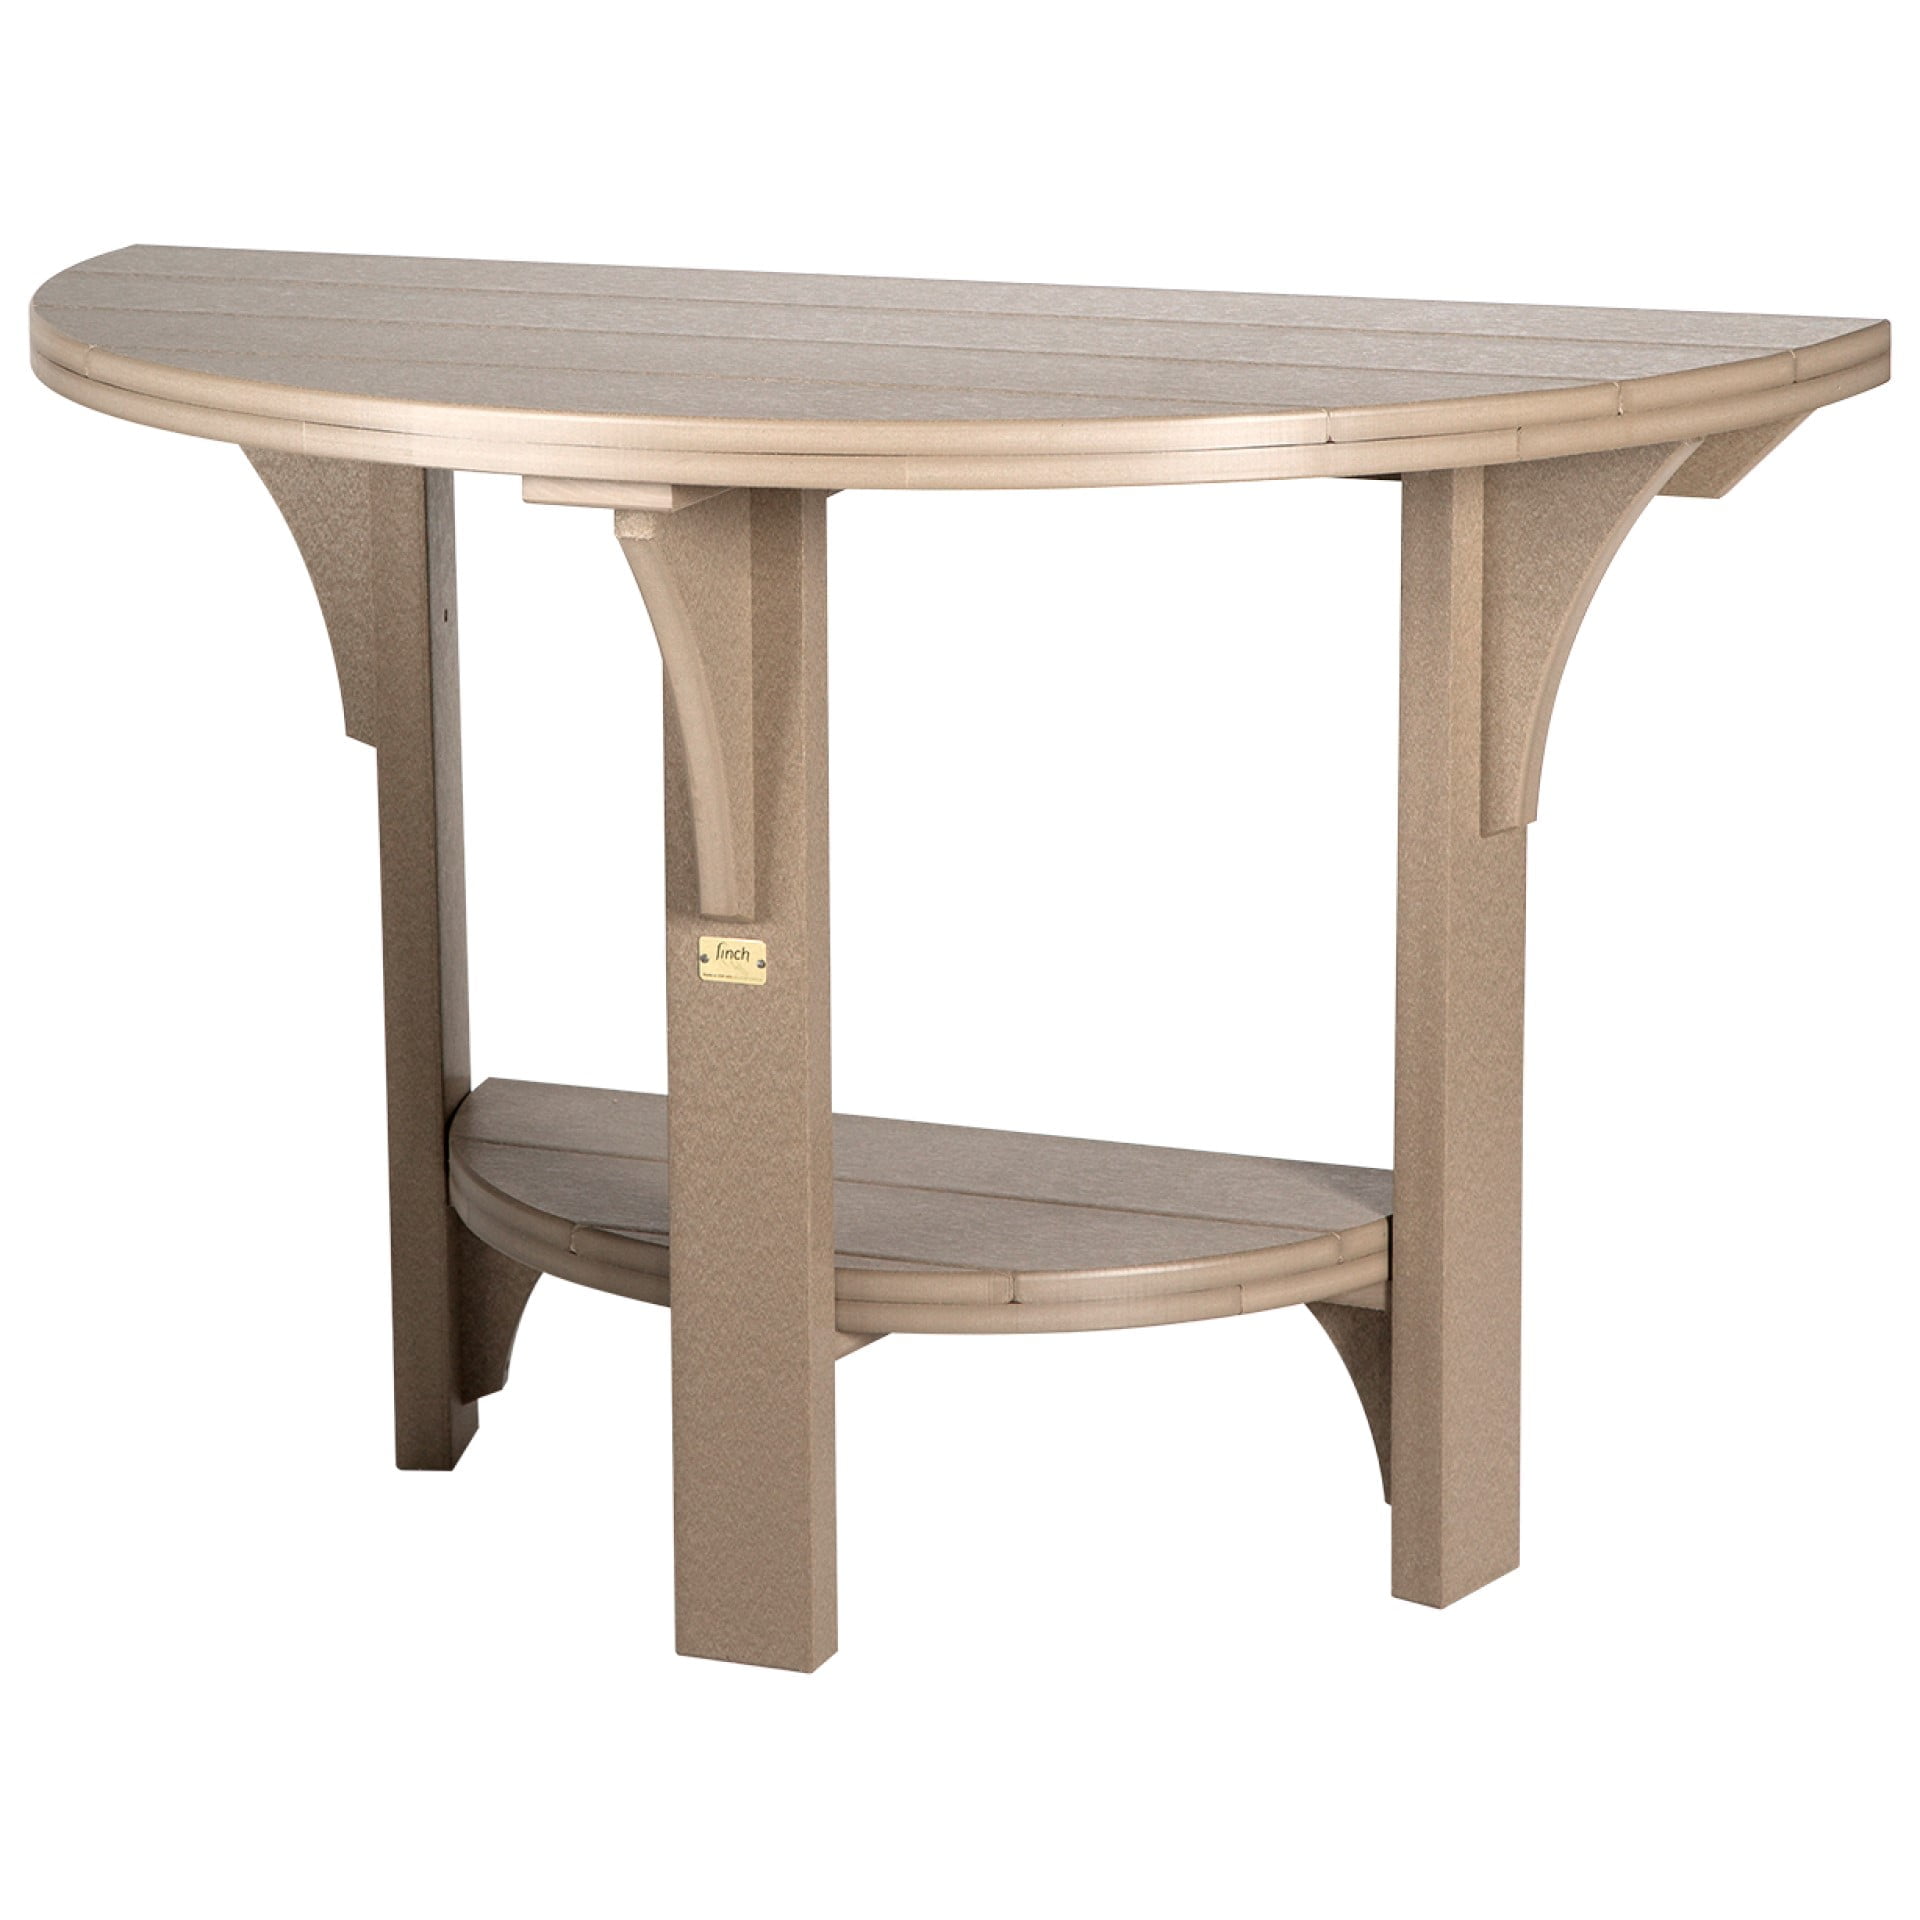 Finch Great Bay Half Round Table-Dining,Counter, or Bar Height